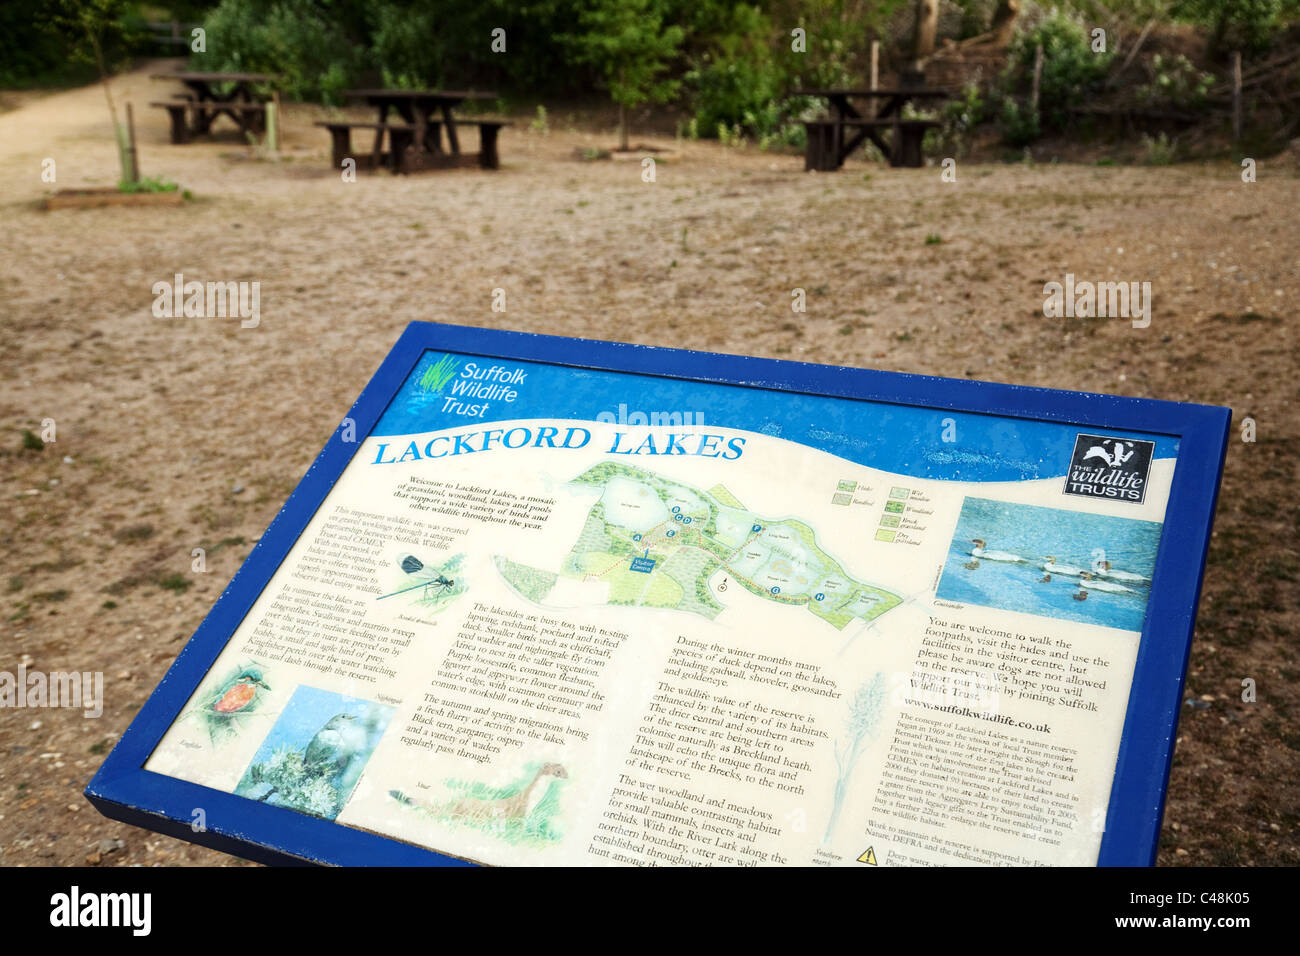 Sign for walks at Lackford lakes visitor centre, Suffolk wildlife trust UK Stock Photo